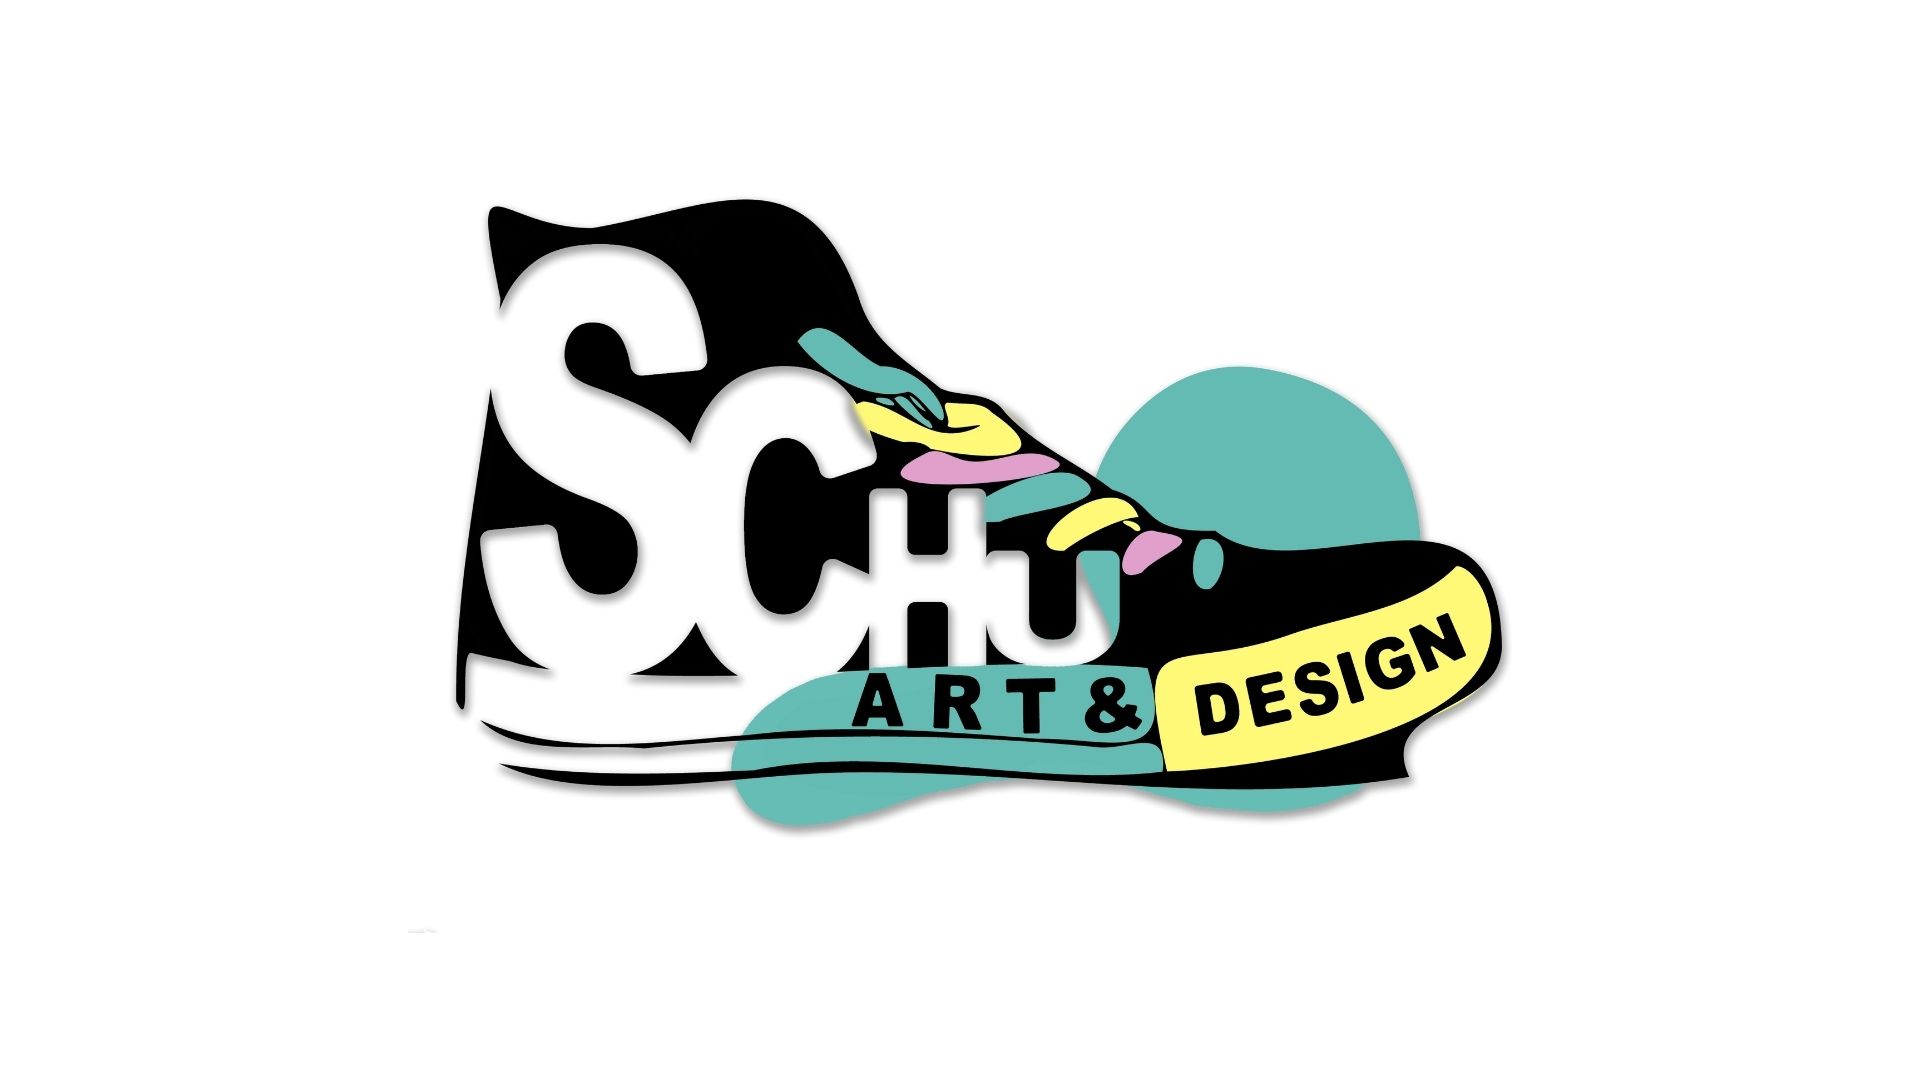 "Schu Logo," Logo Design / "Schu Logo," Logo Design, 1080x1920 px PNG, 2019. This is my logo, I want it to be fun, playful and representative of my work.